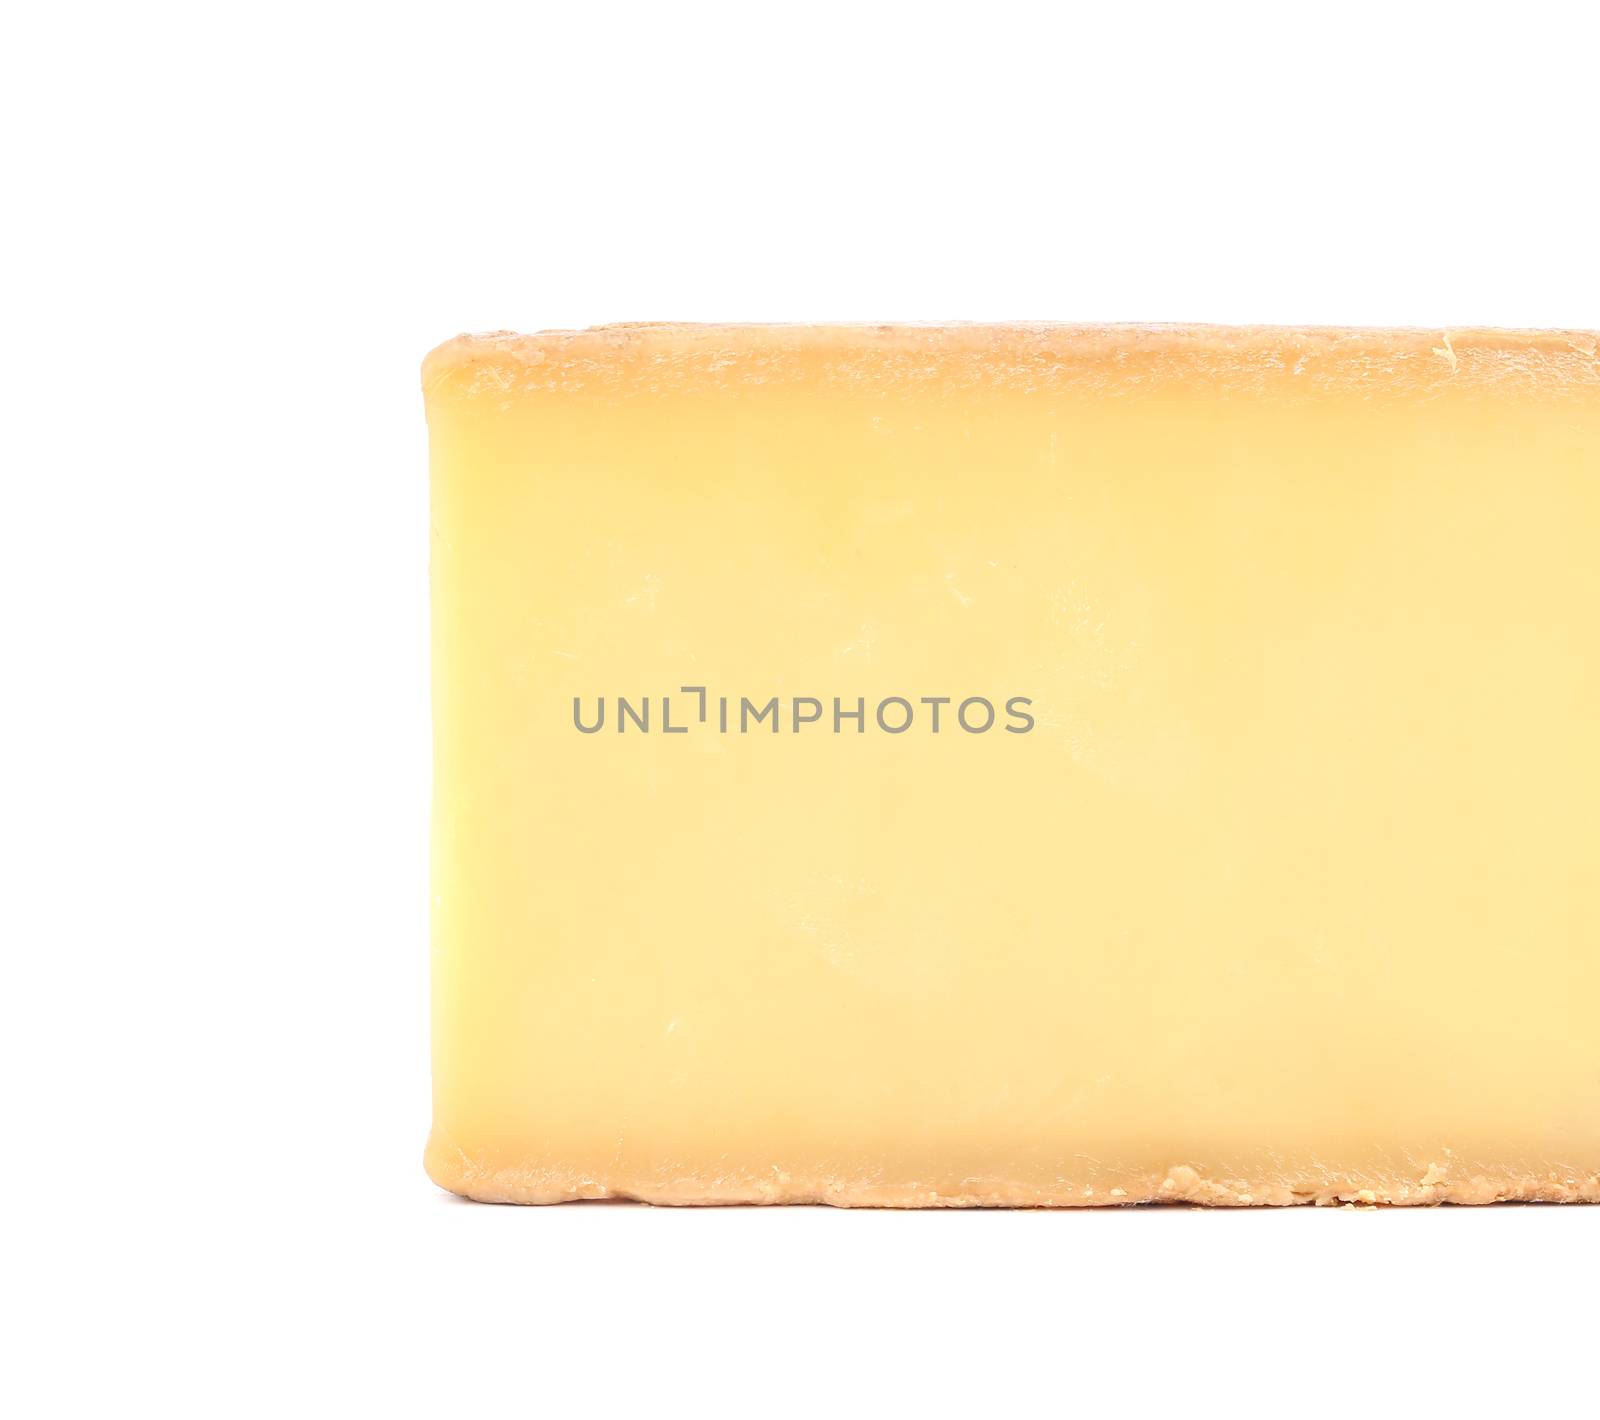 Block of parmesan cheese. Isolated on a white background.